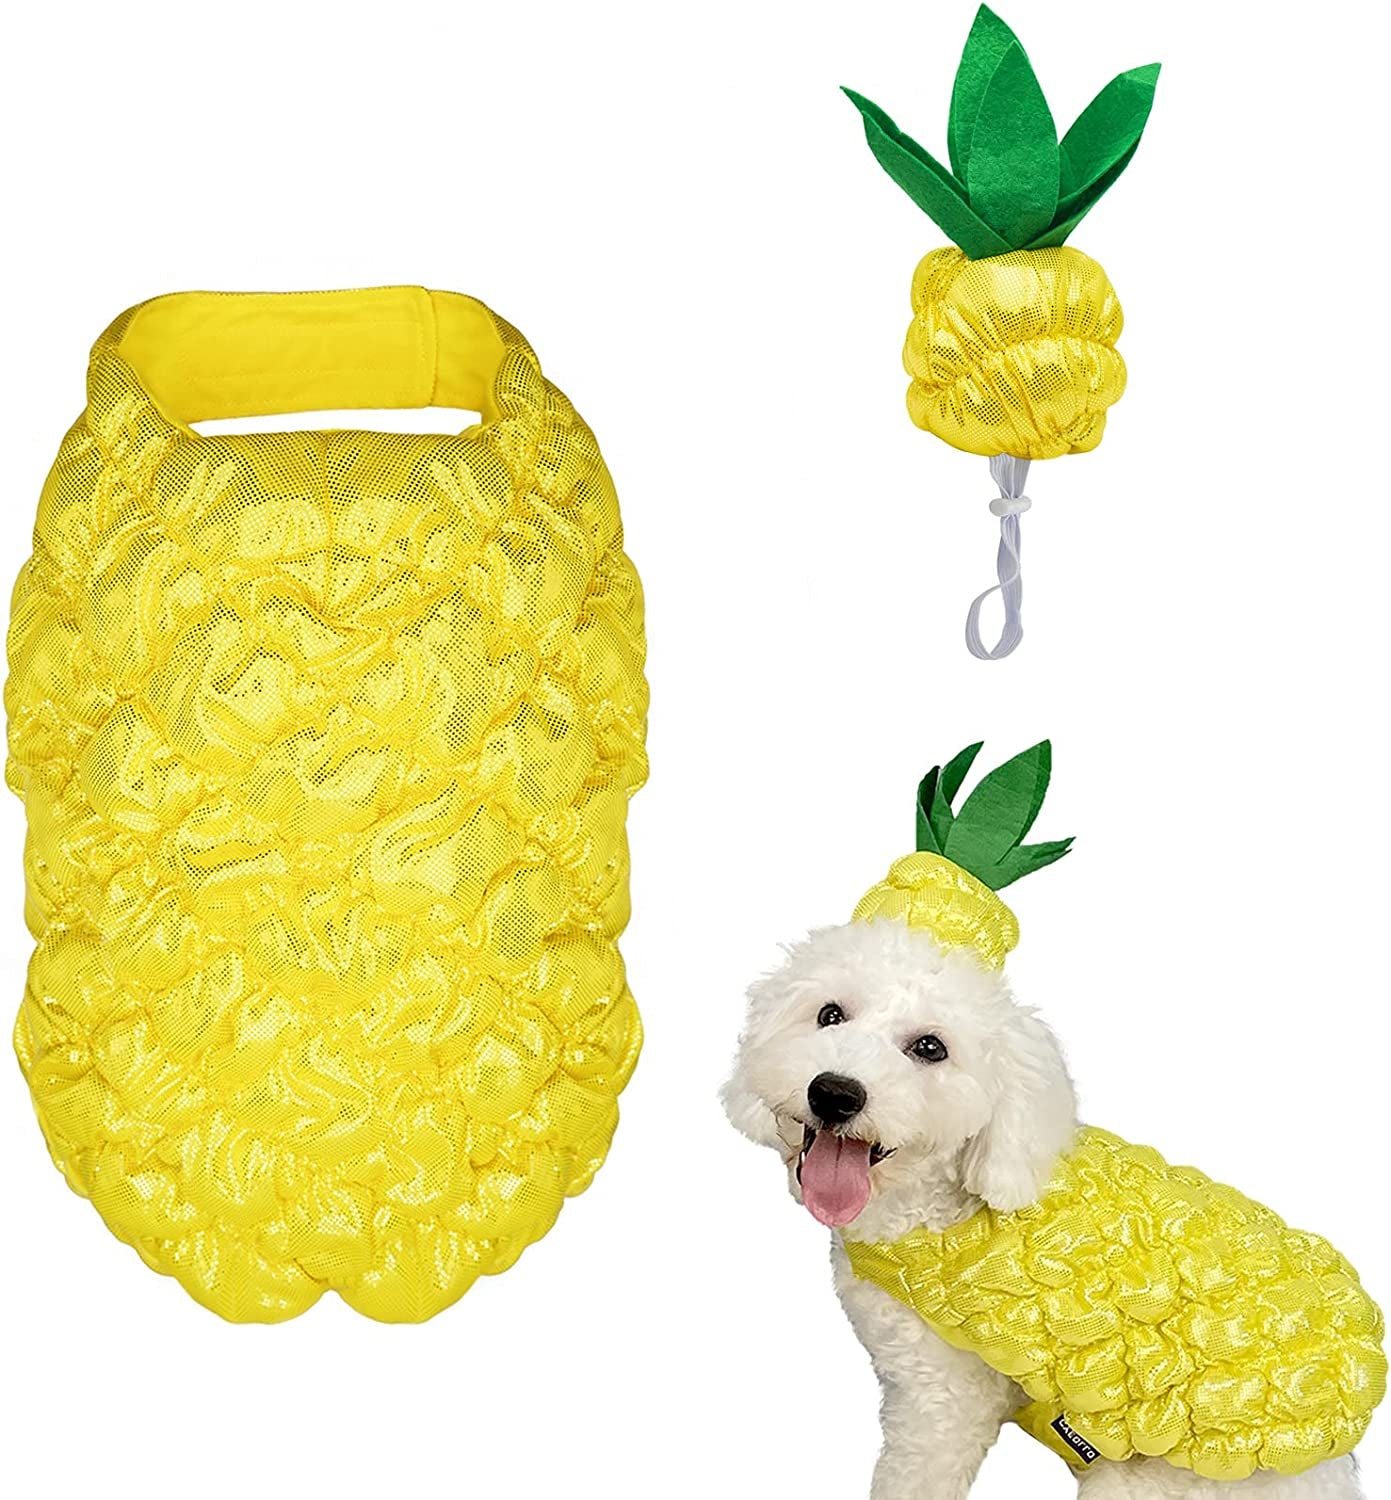 Cyeollo Dog Halloween Costume Pineapple Dress-Up Costumes Outfits Cosplay Funny Holiday Clothes for Small Dogs Size S